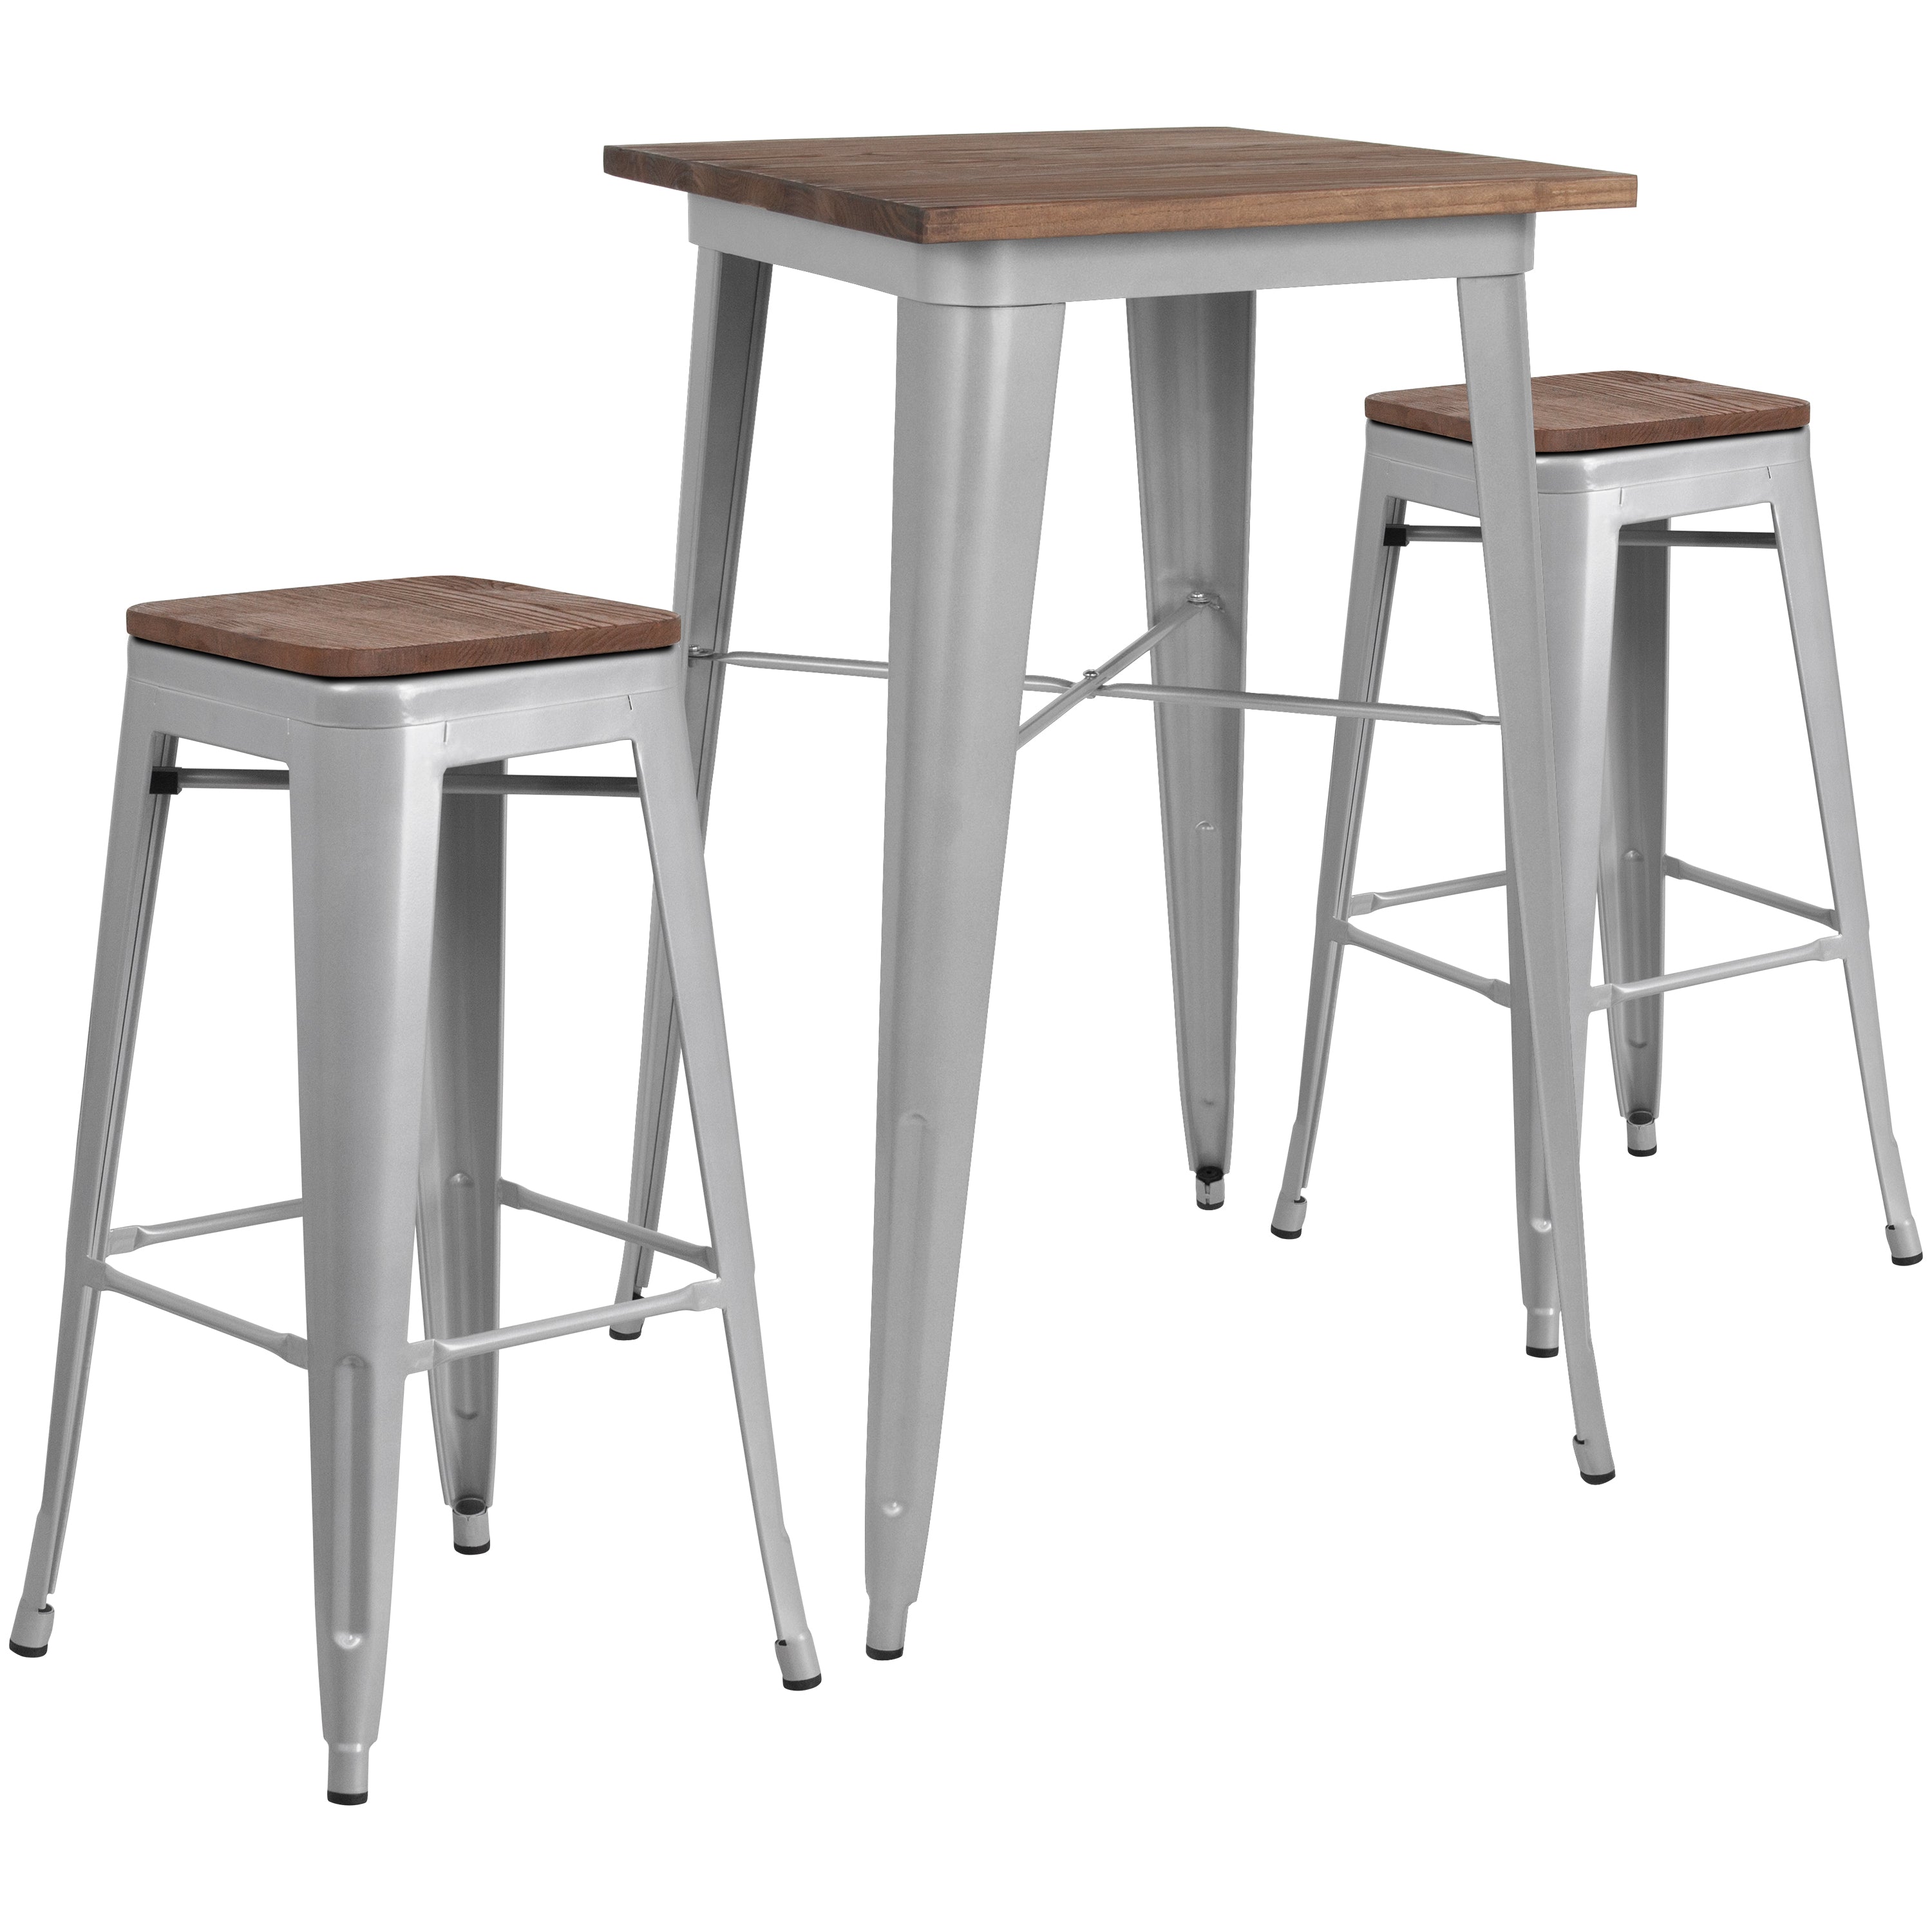 23.5" Square Metal Bar Table Set with Wood Top and 2 Backless Stools-Metal/ Colorful Bar Table and Stool Set-Flash Furniture-Wall2Wall Furnishings